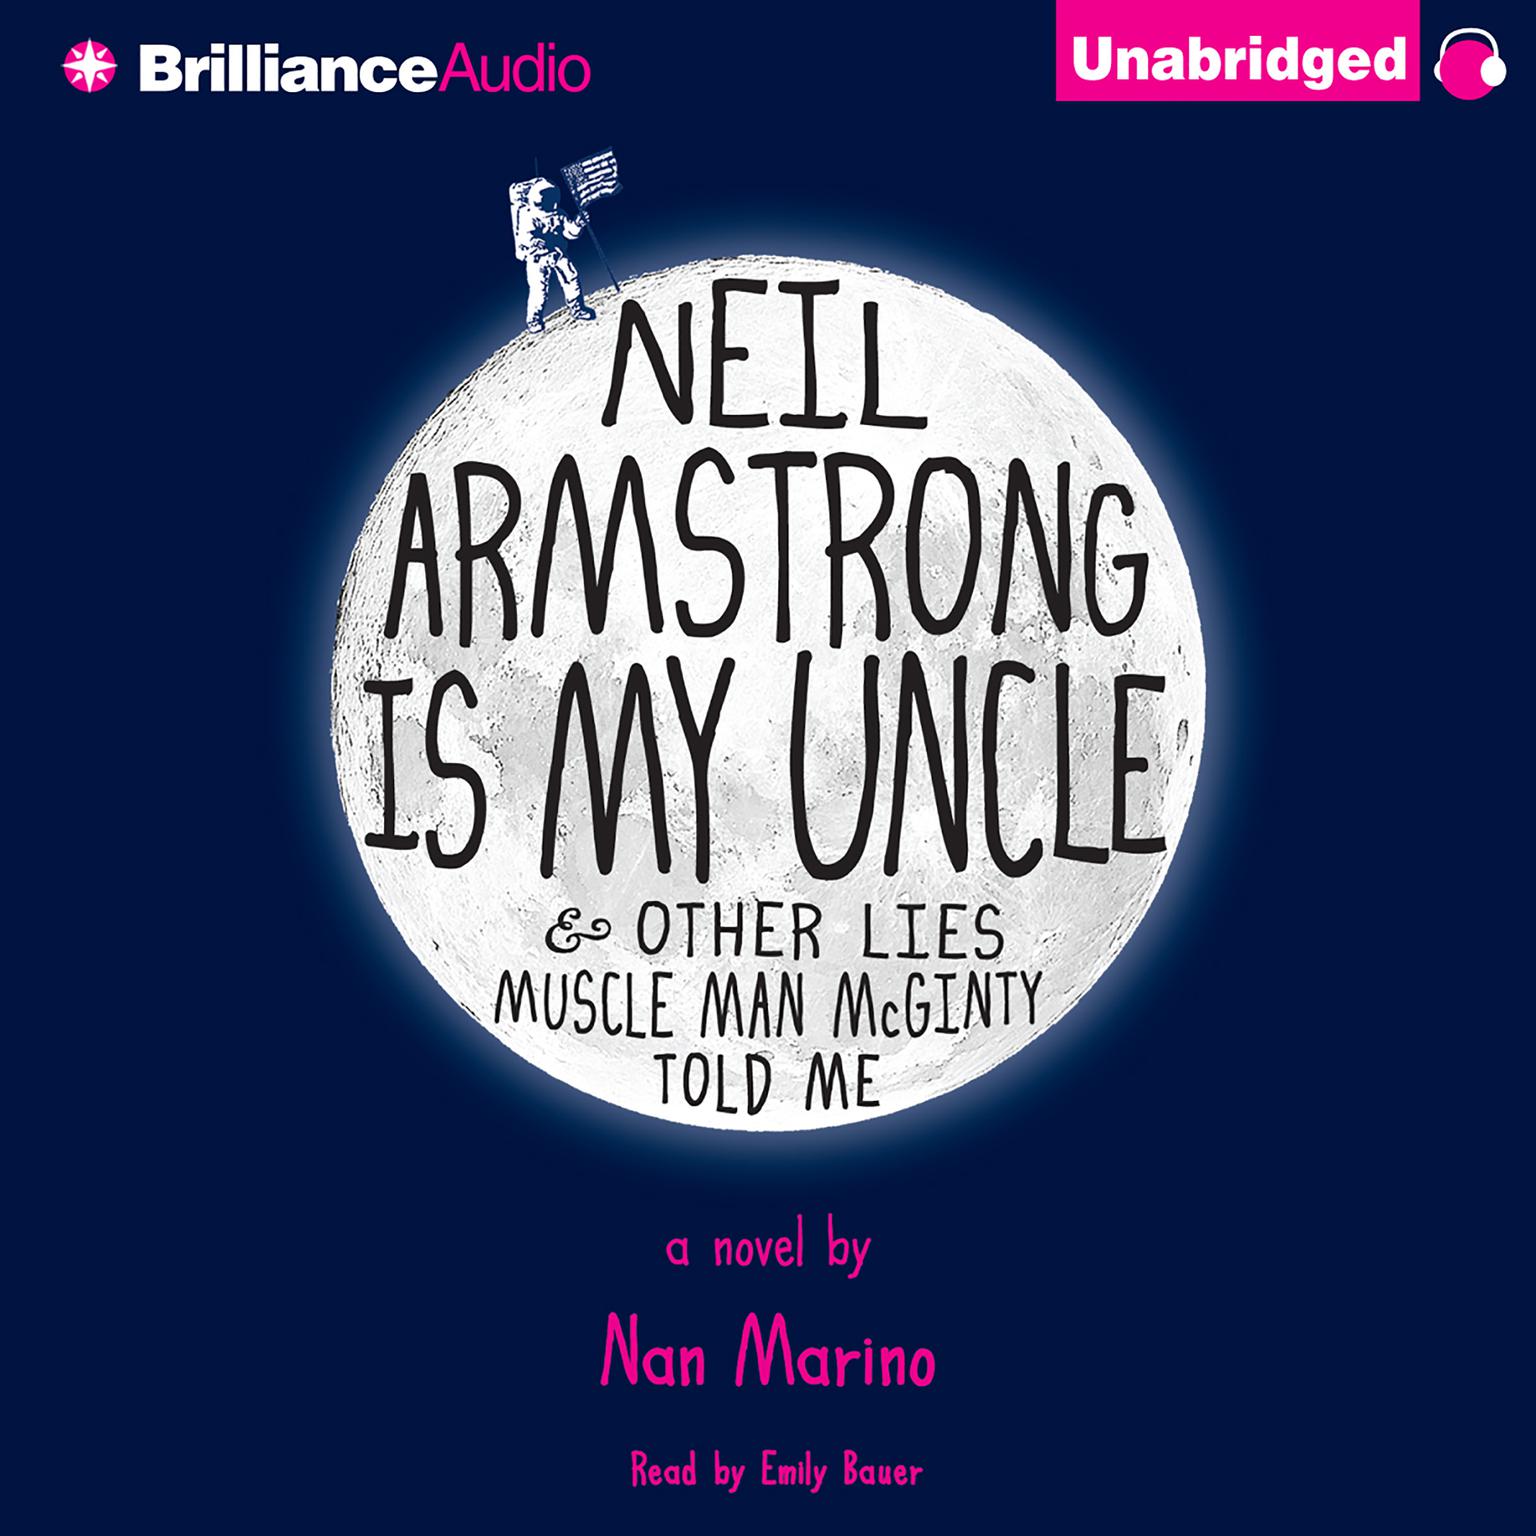 Neil Armstrong Is My Uncle & Other Lies Muscle Man McGinty Told Me Audiobook, by Nan Marino